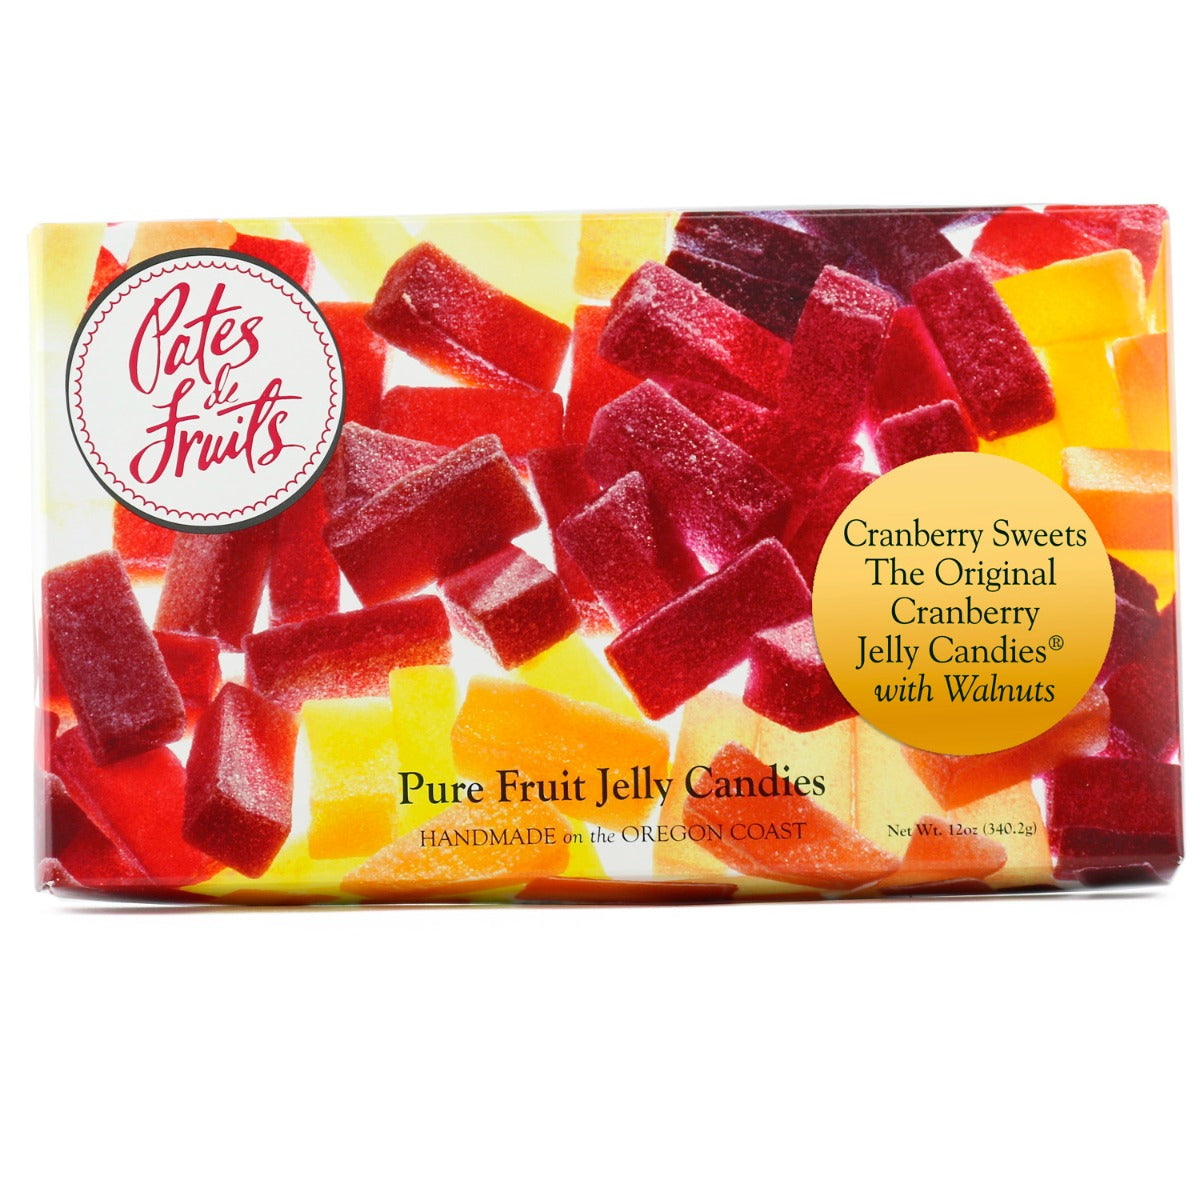 Original Cranberry Jelly Candies with Walnuts 12oz.